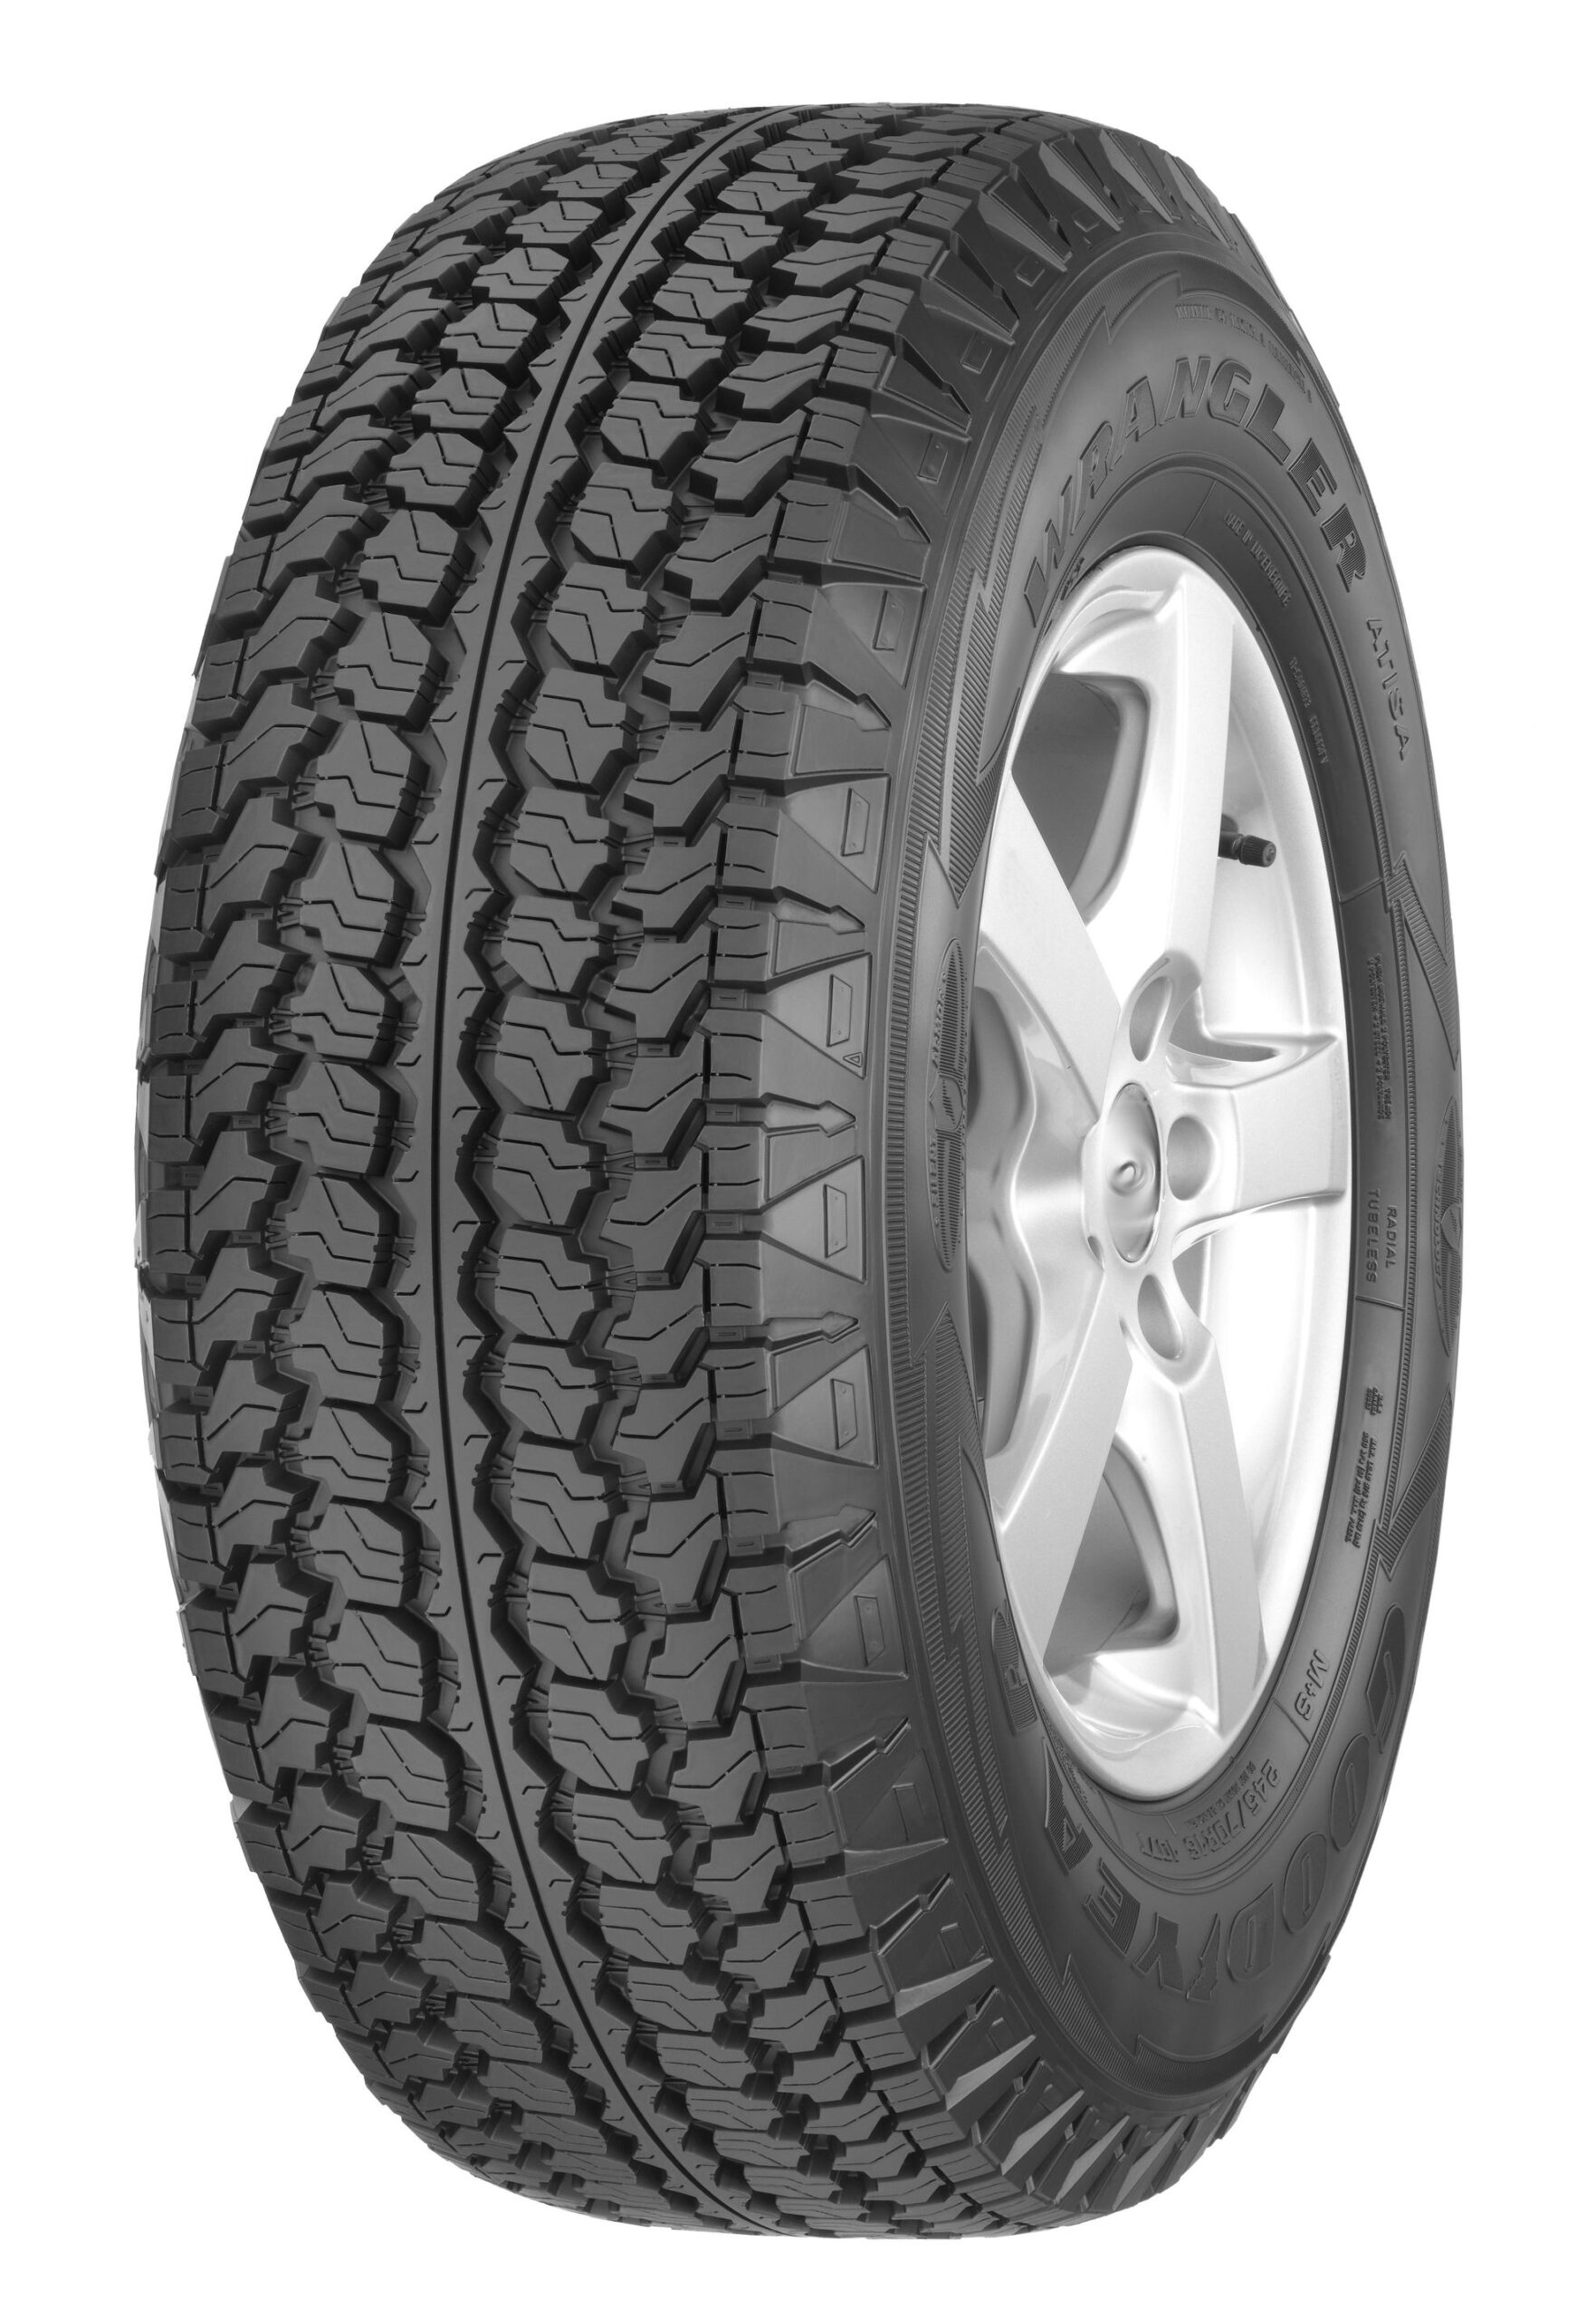 Goodyear Wrangler At/sa 5rib | What Tyre | Independent tyre comparison